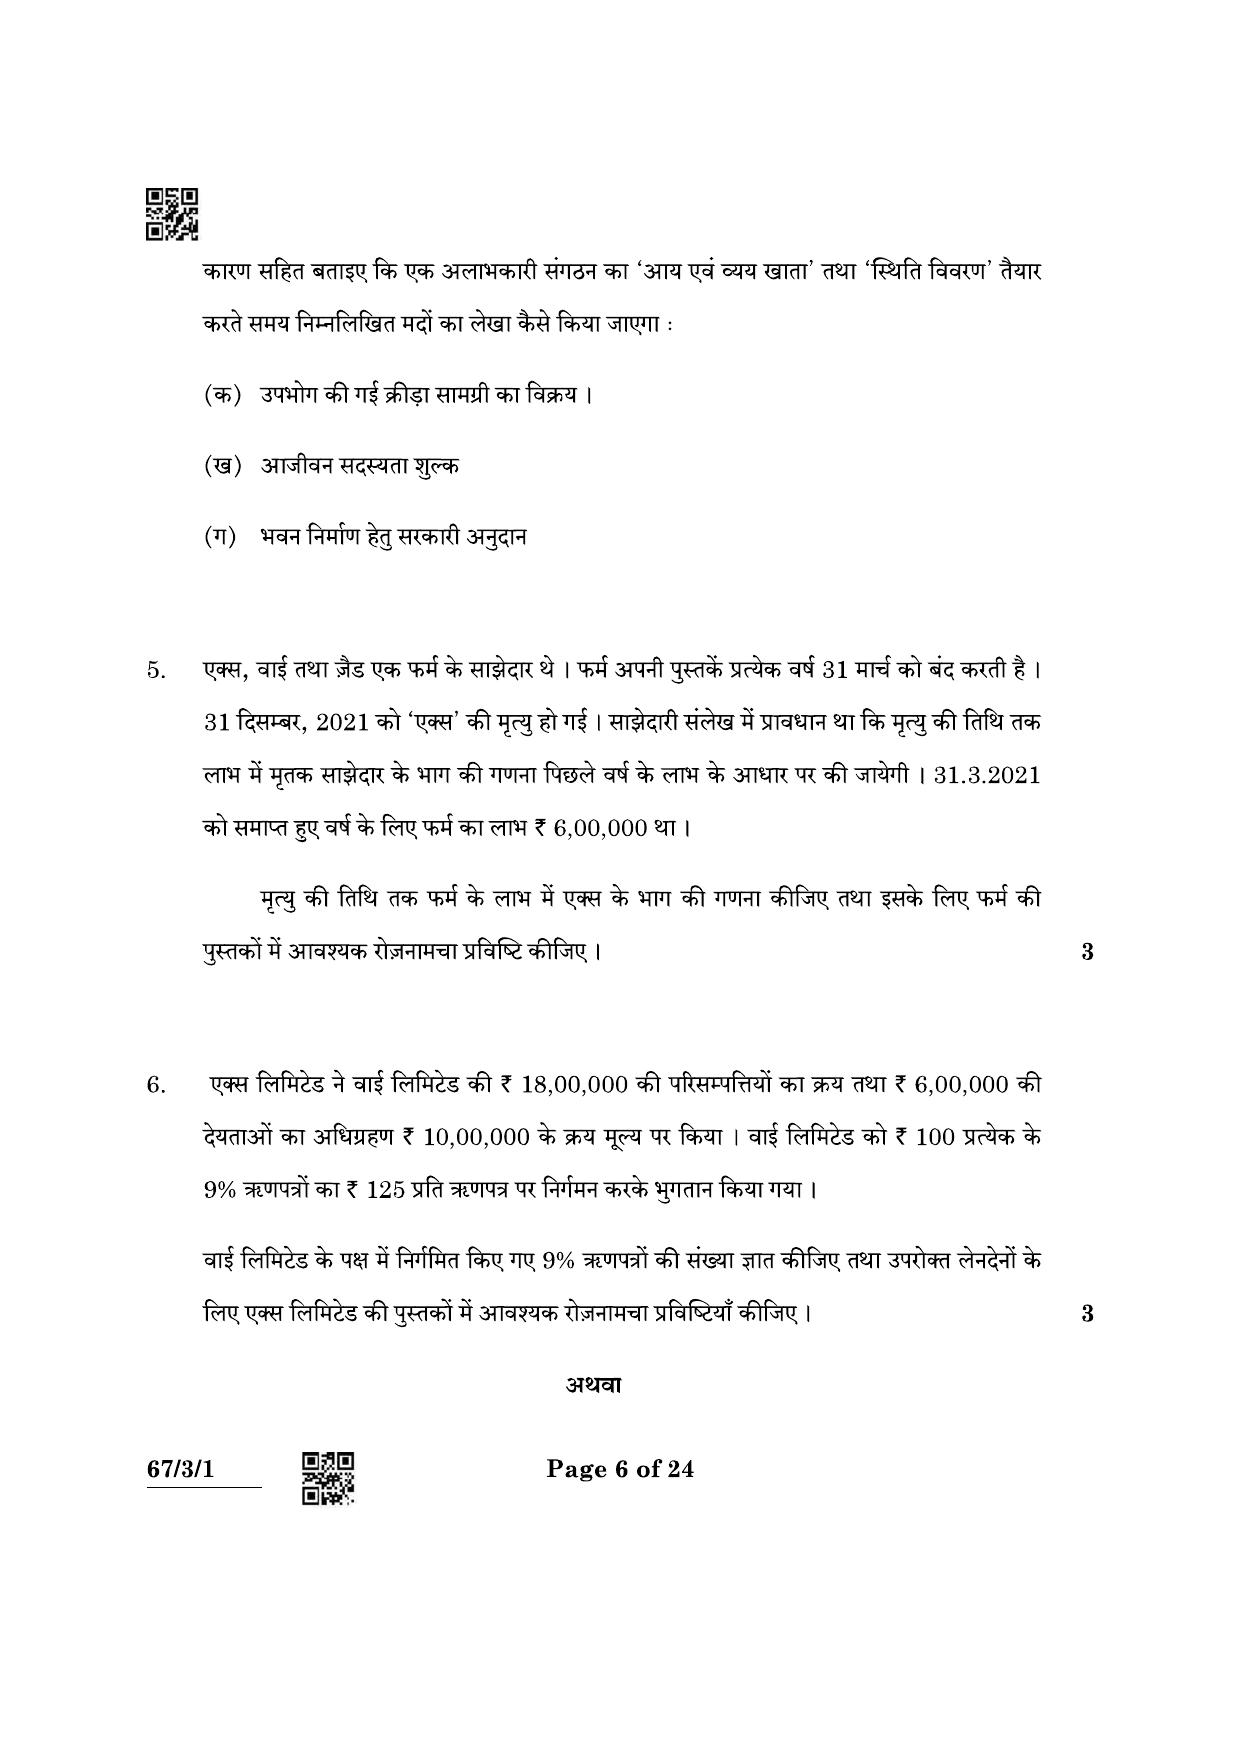 CBSE Class 12 67-3-1 Accountancy 2022 Question Paper - Page 6